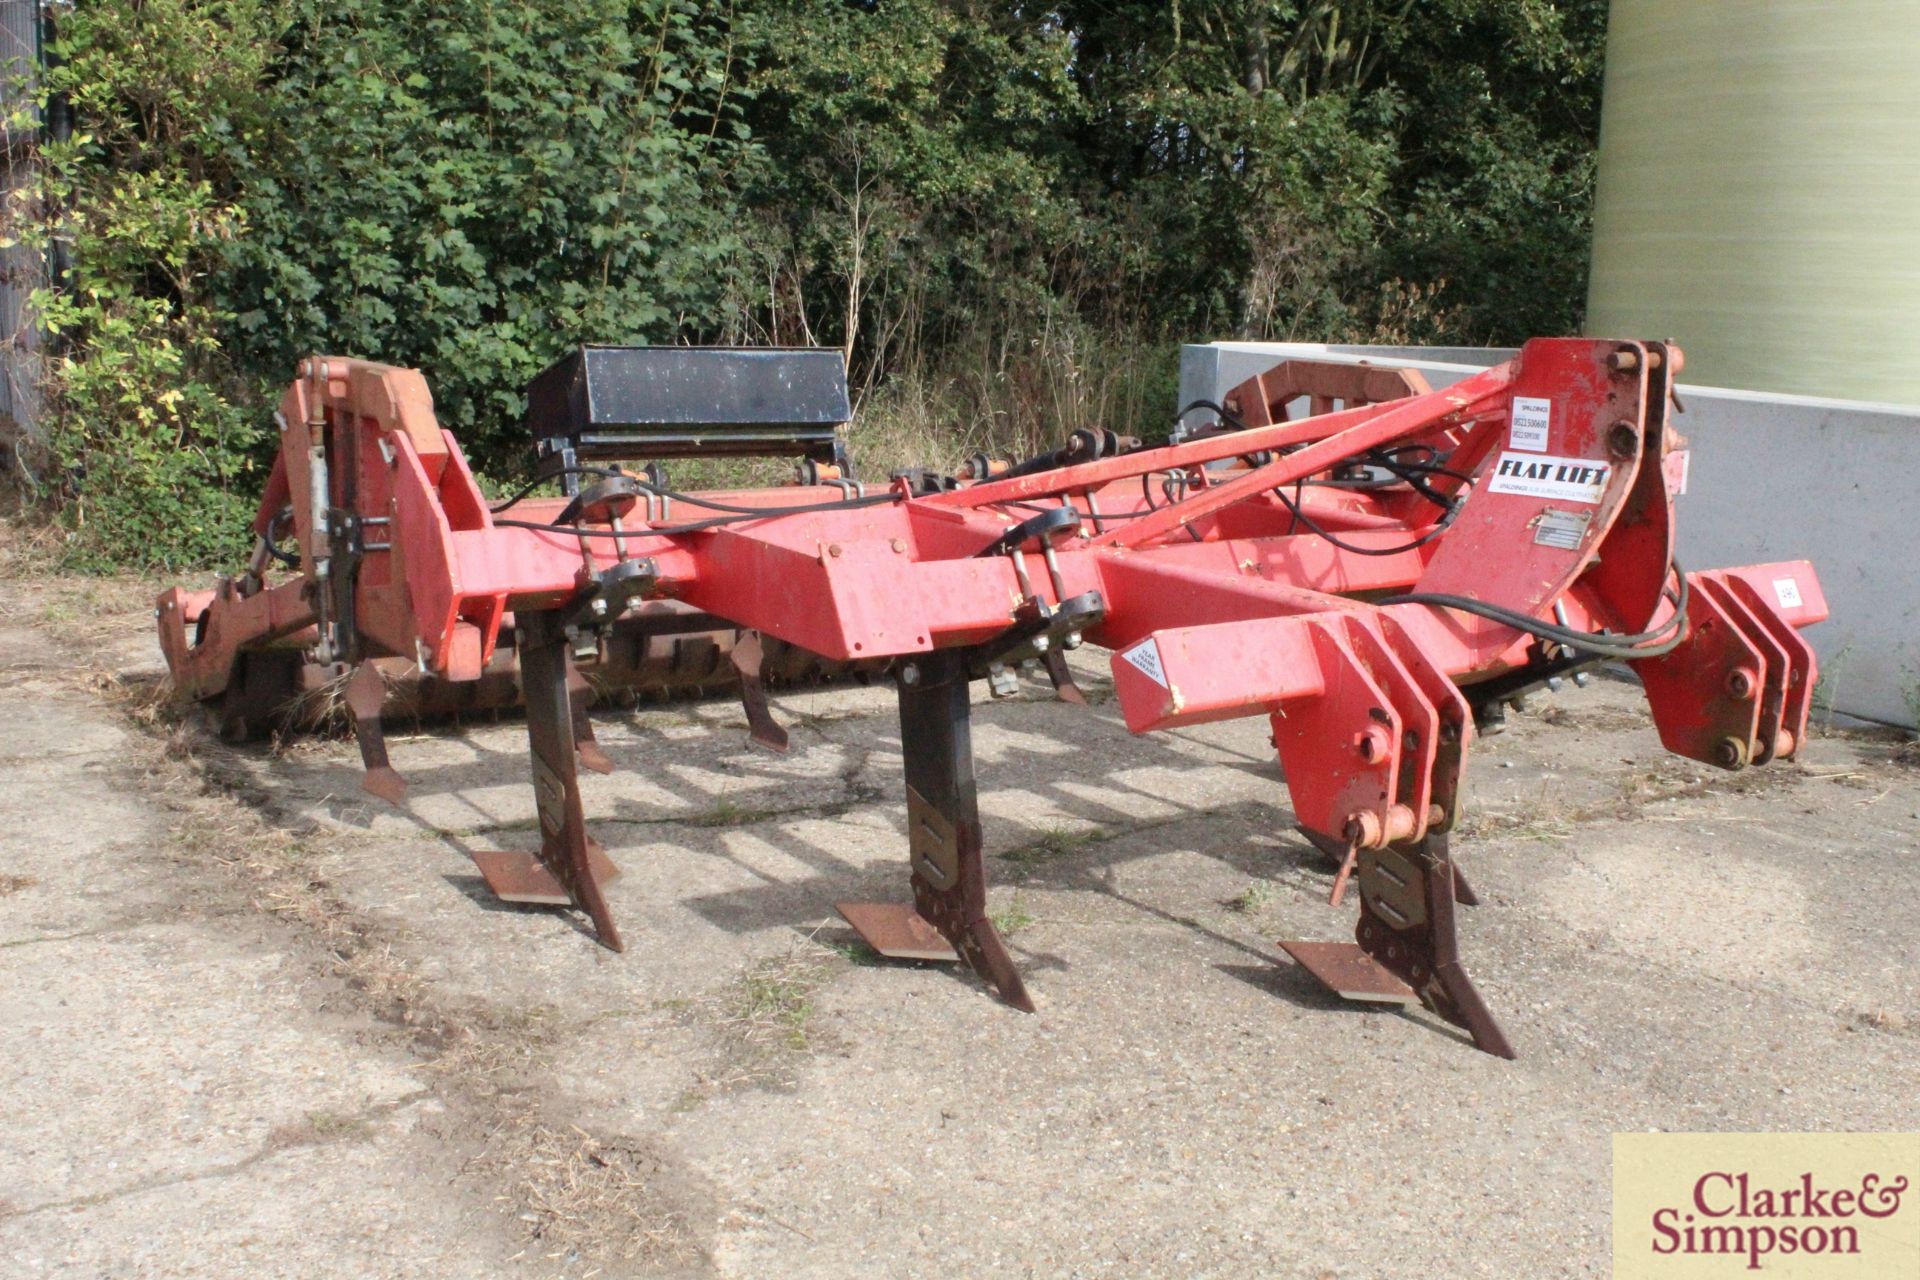 Spaldings Flat Lift FL5 five leg subsoiler. With swivel legs, six sprung loaded winged tines and